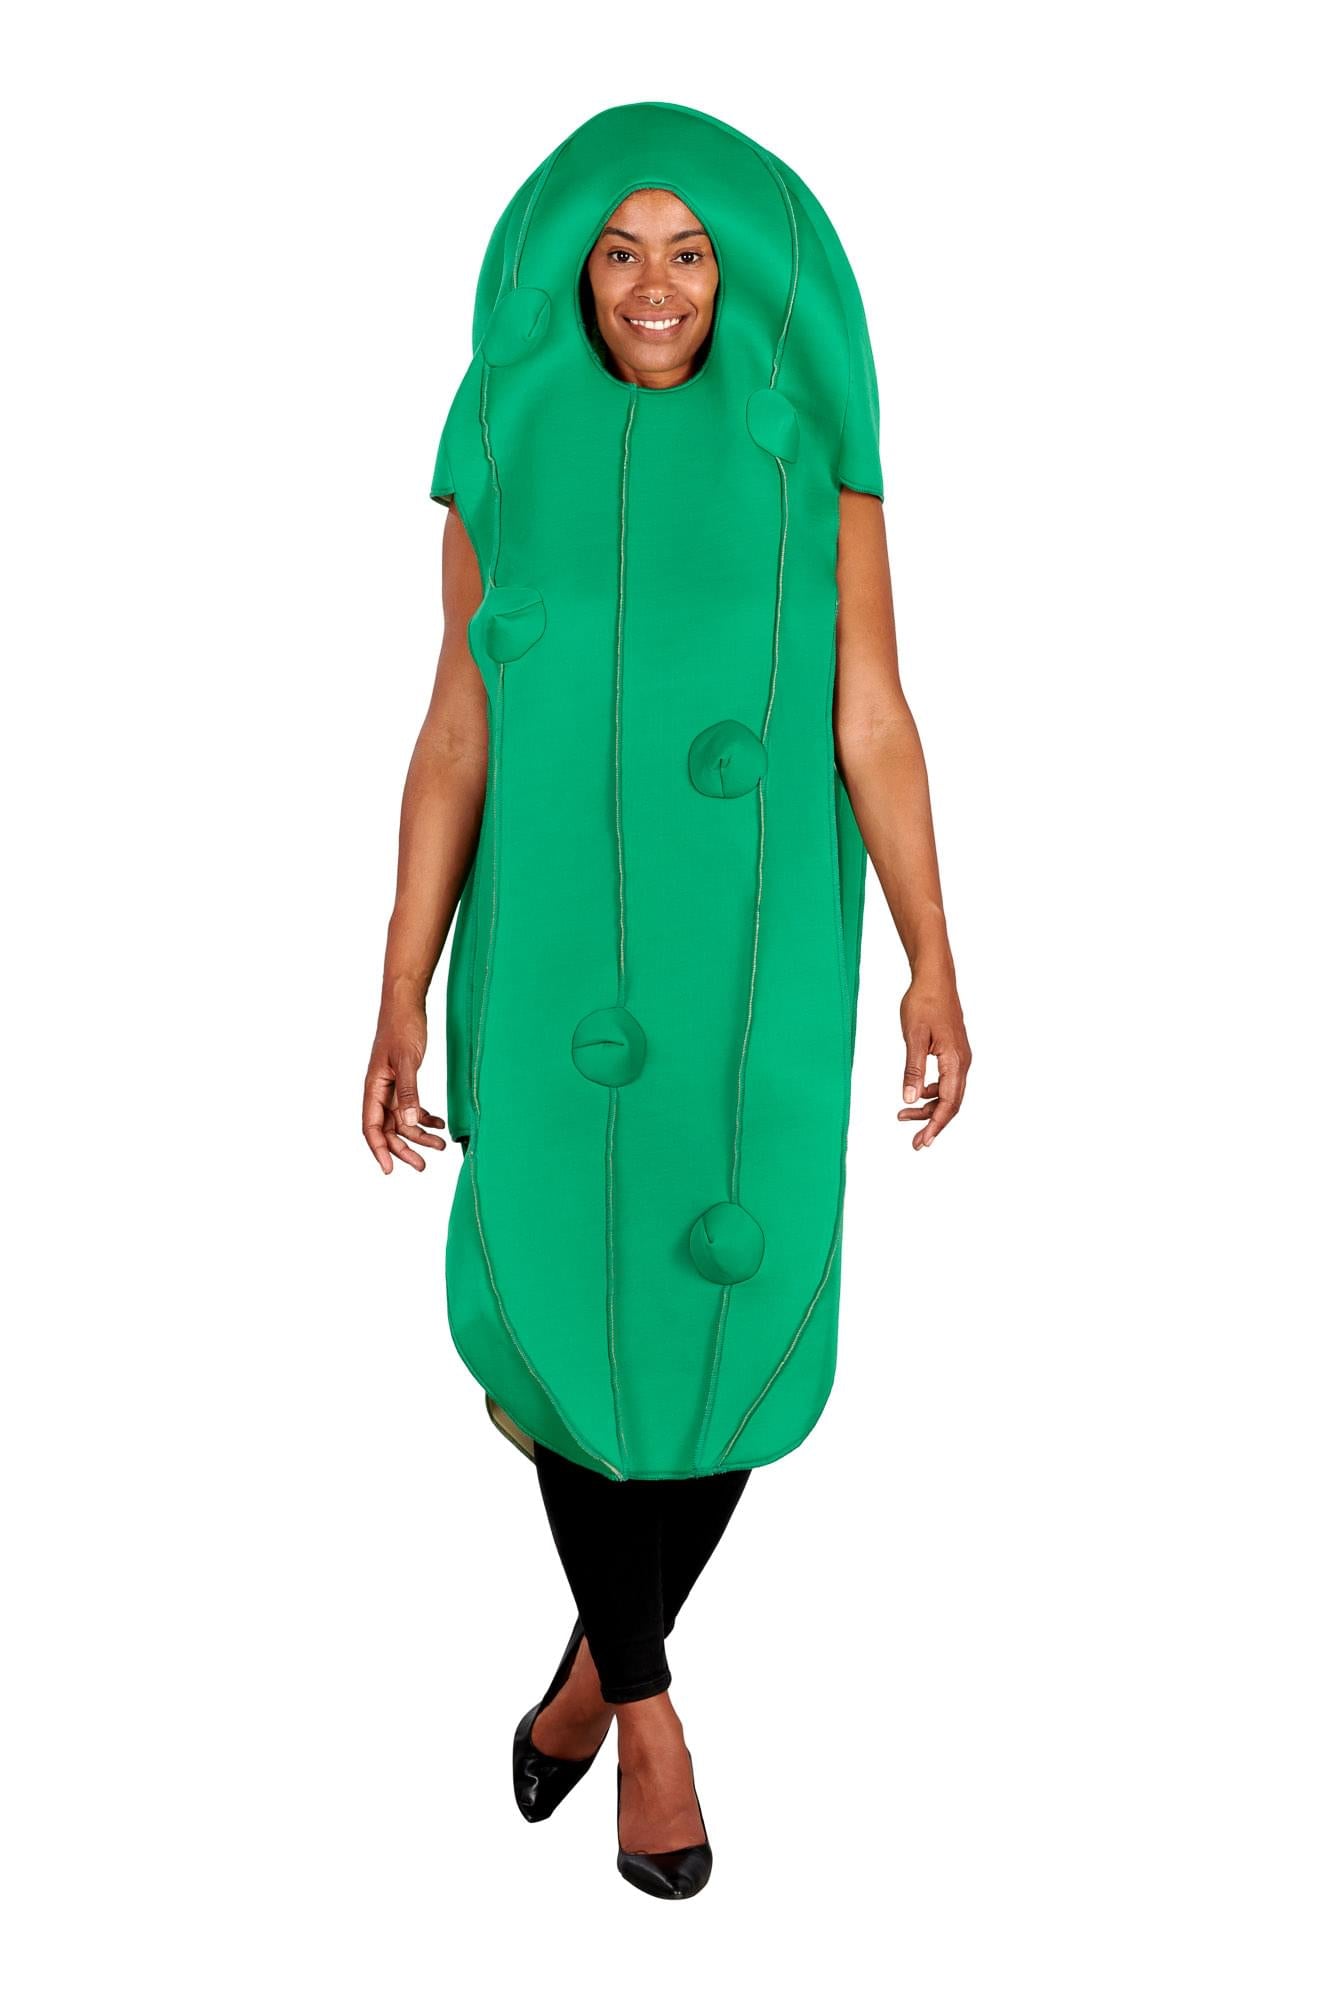 Pickle Adult Costume | One Size